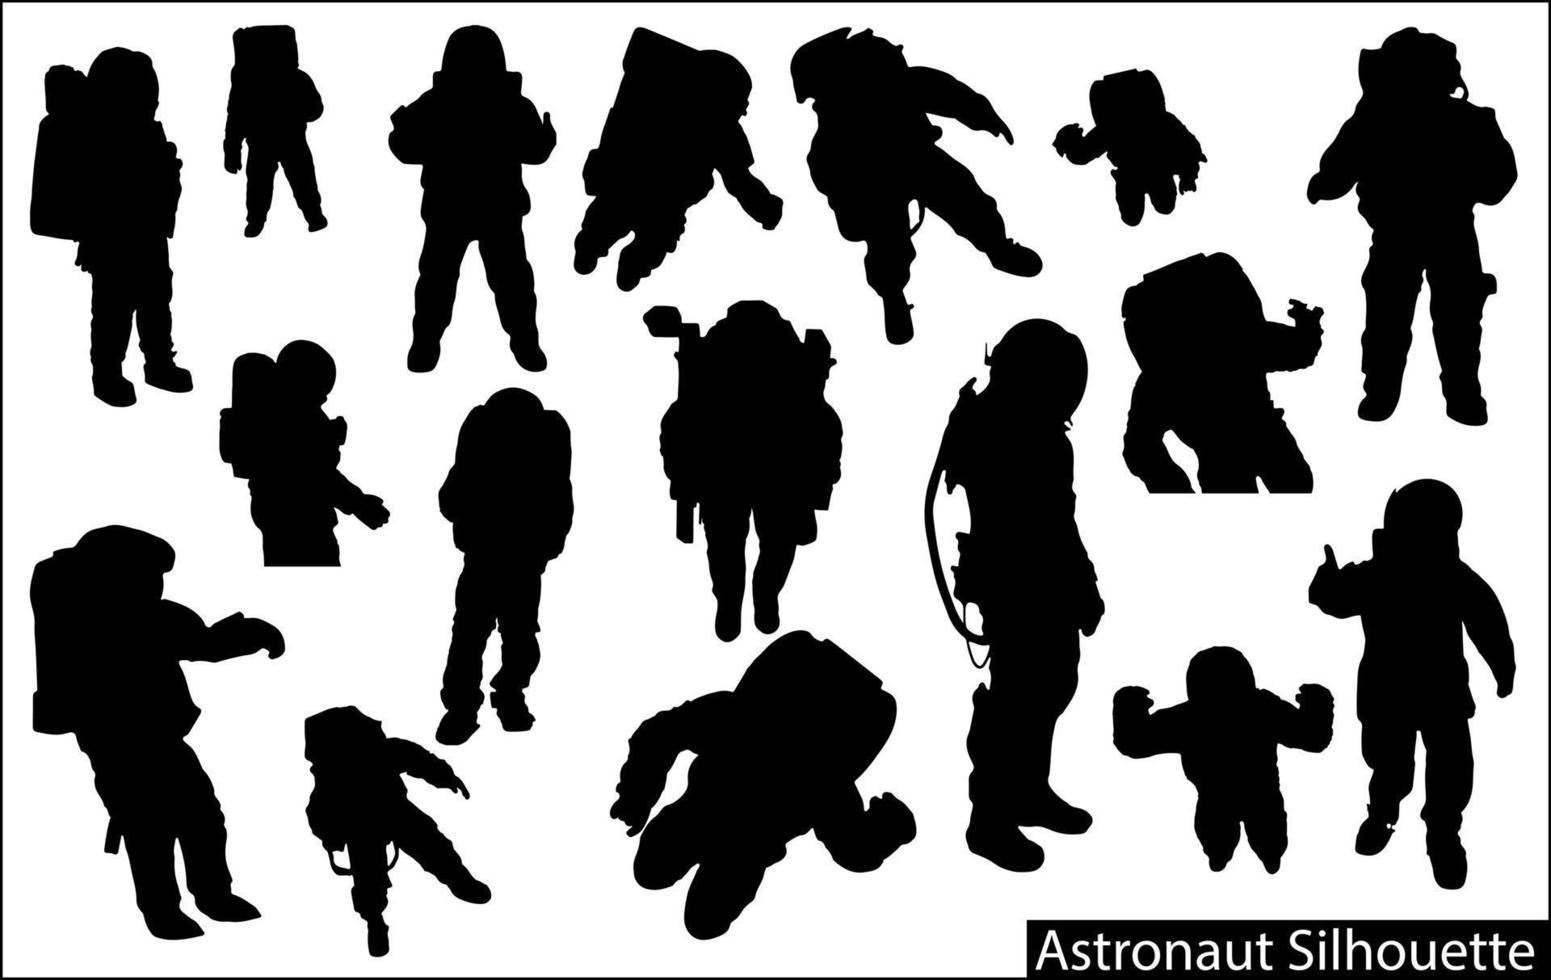 Astronaut Silhouette in spacesuits vector